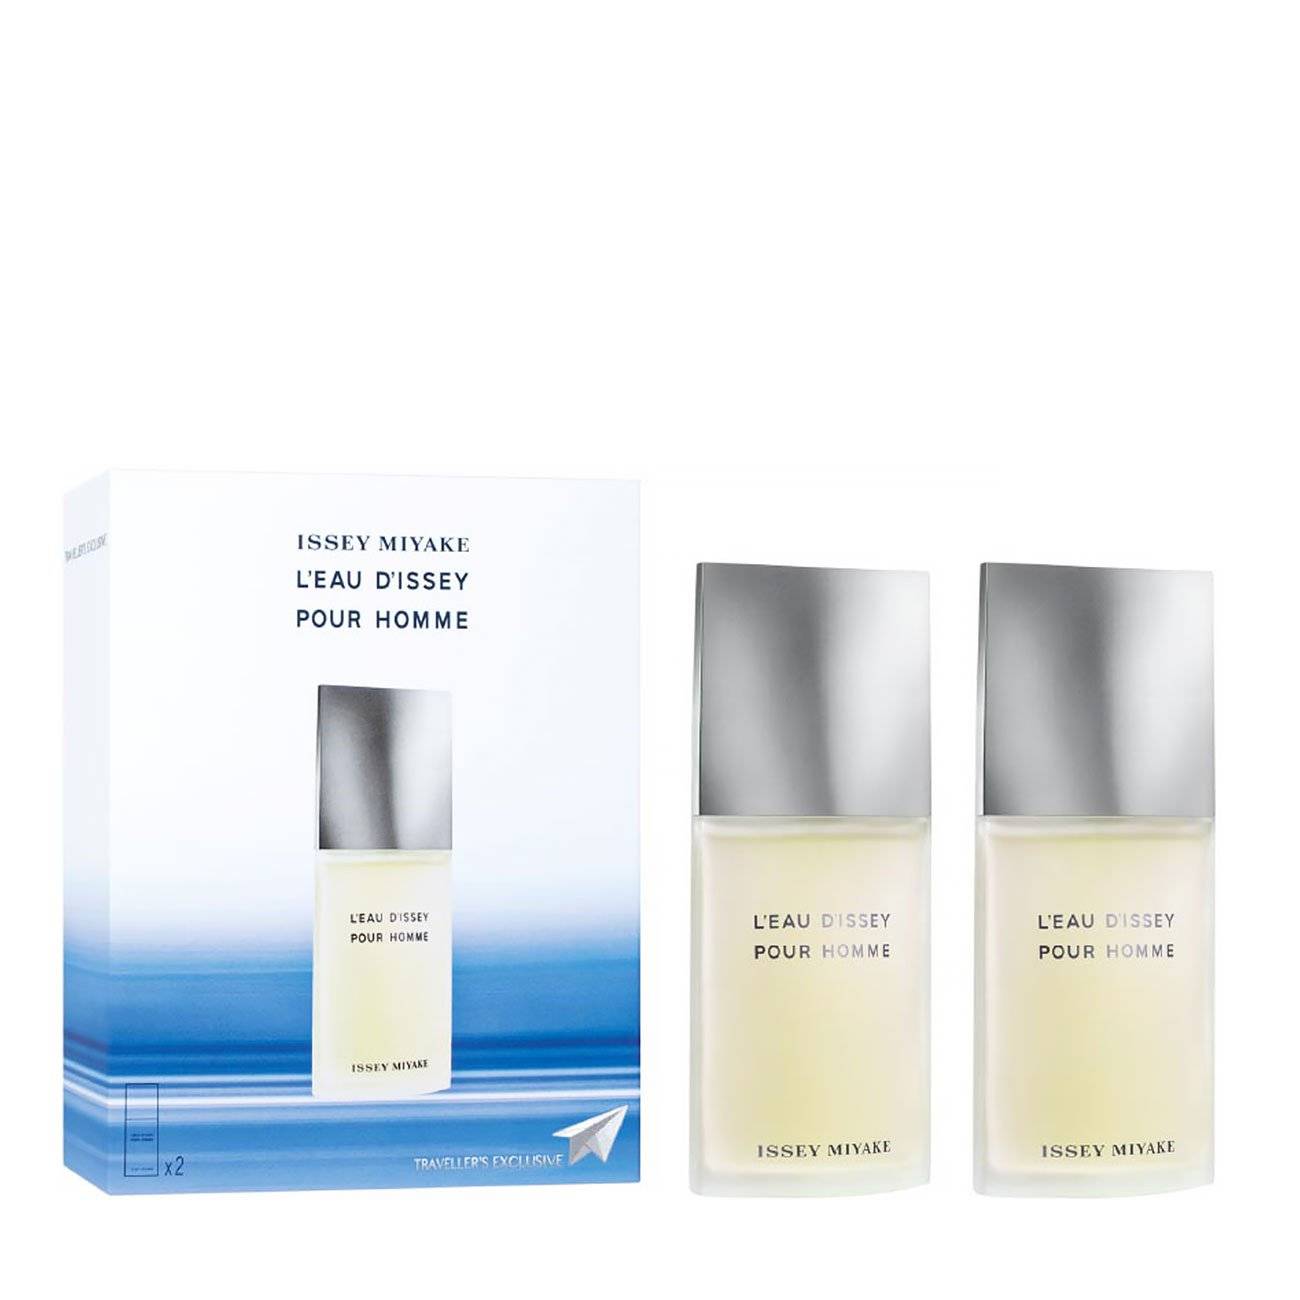 L’EAU D’ISSEY POUR HOMME DUO SET 80ml Issey Miyake bestvalue.eu